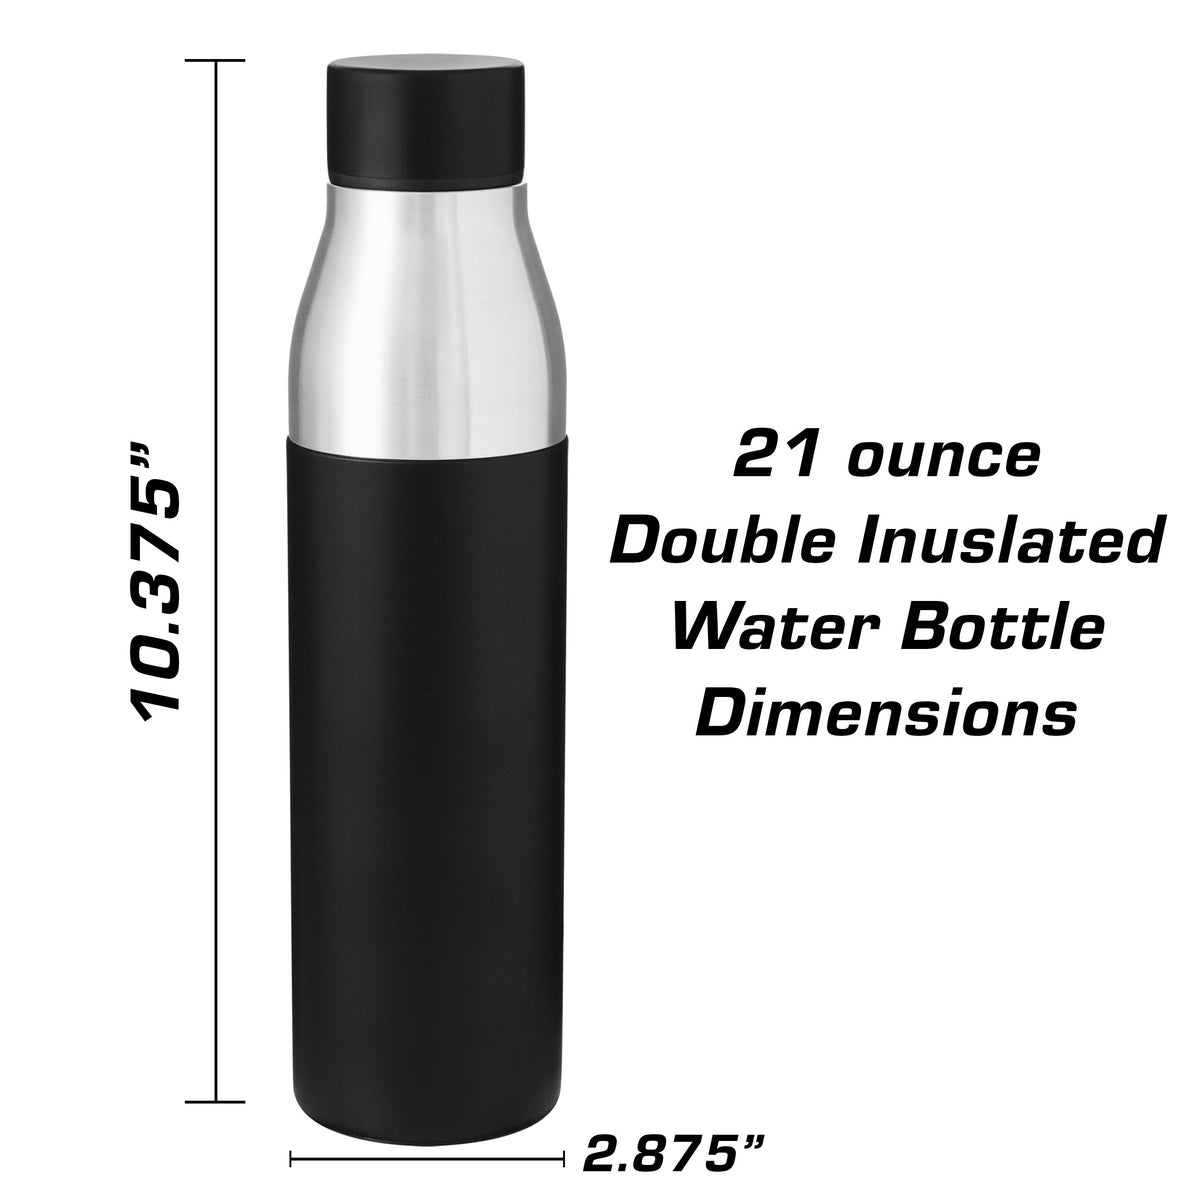 VW Scirocco mk2 Insulated Stainless Steel Water Bottle - 21 oz